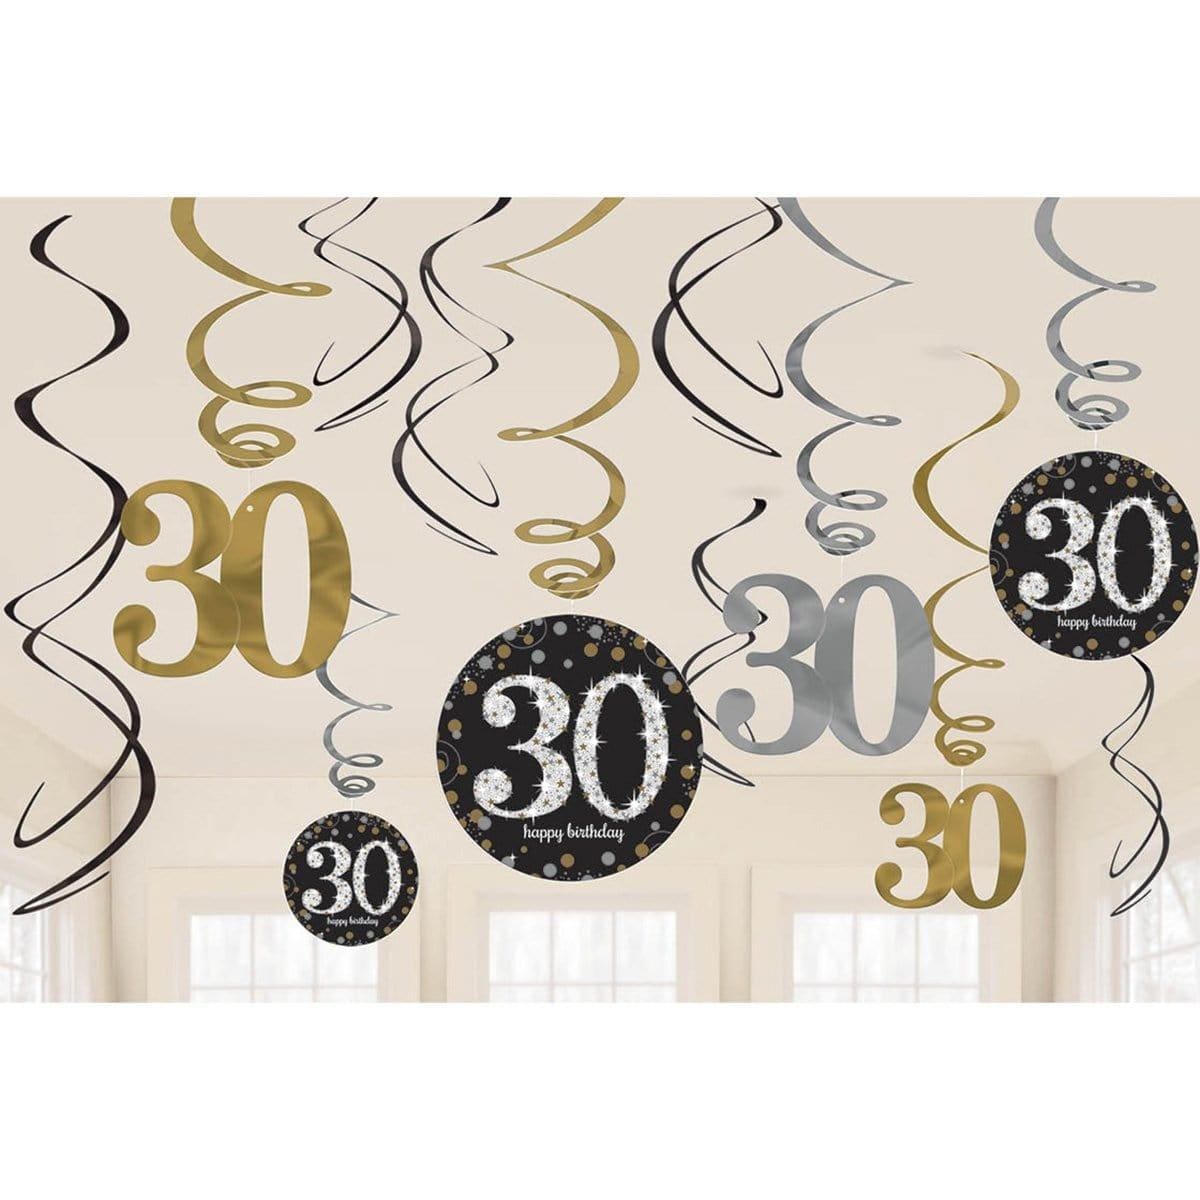 Buy Age Specific Birthday 30th Sparkling Celeb - Foil Swirls 12/pkg. sold at Party Expert